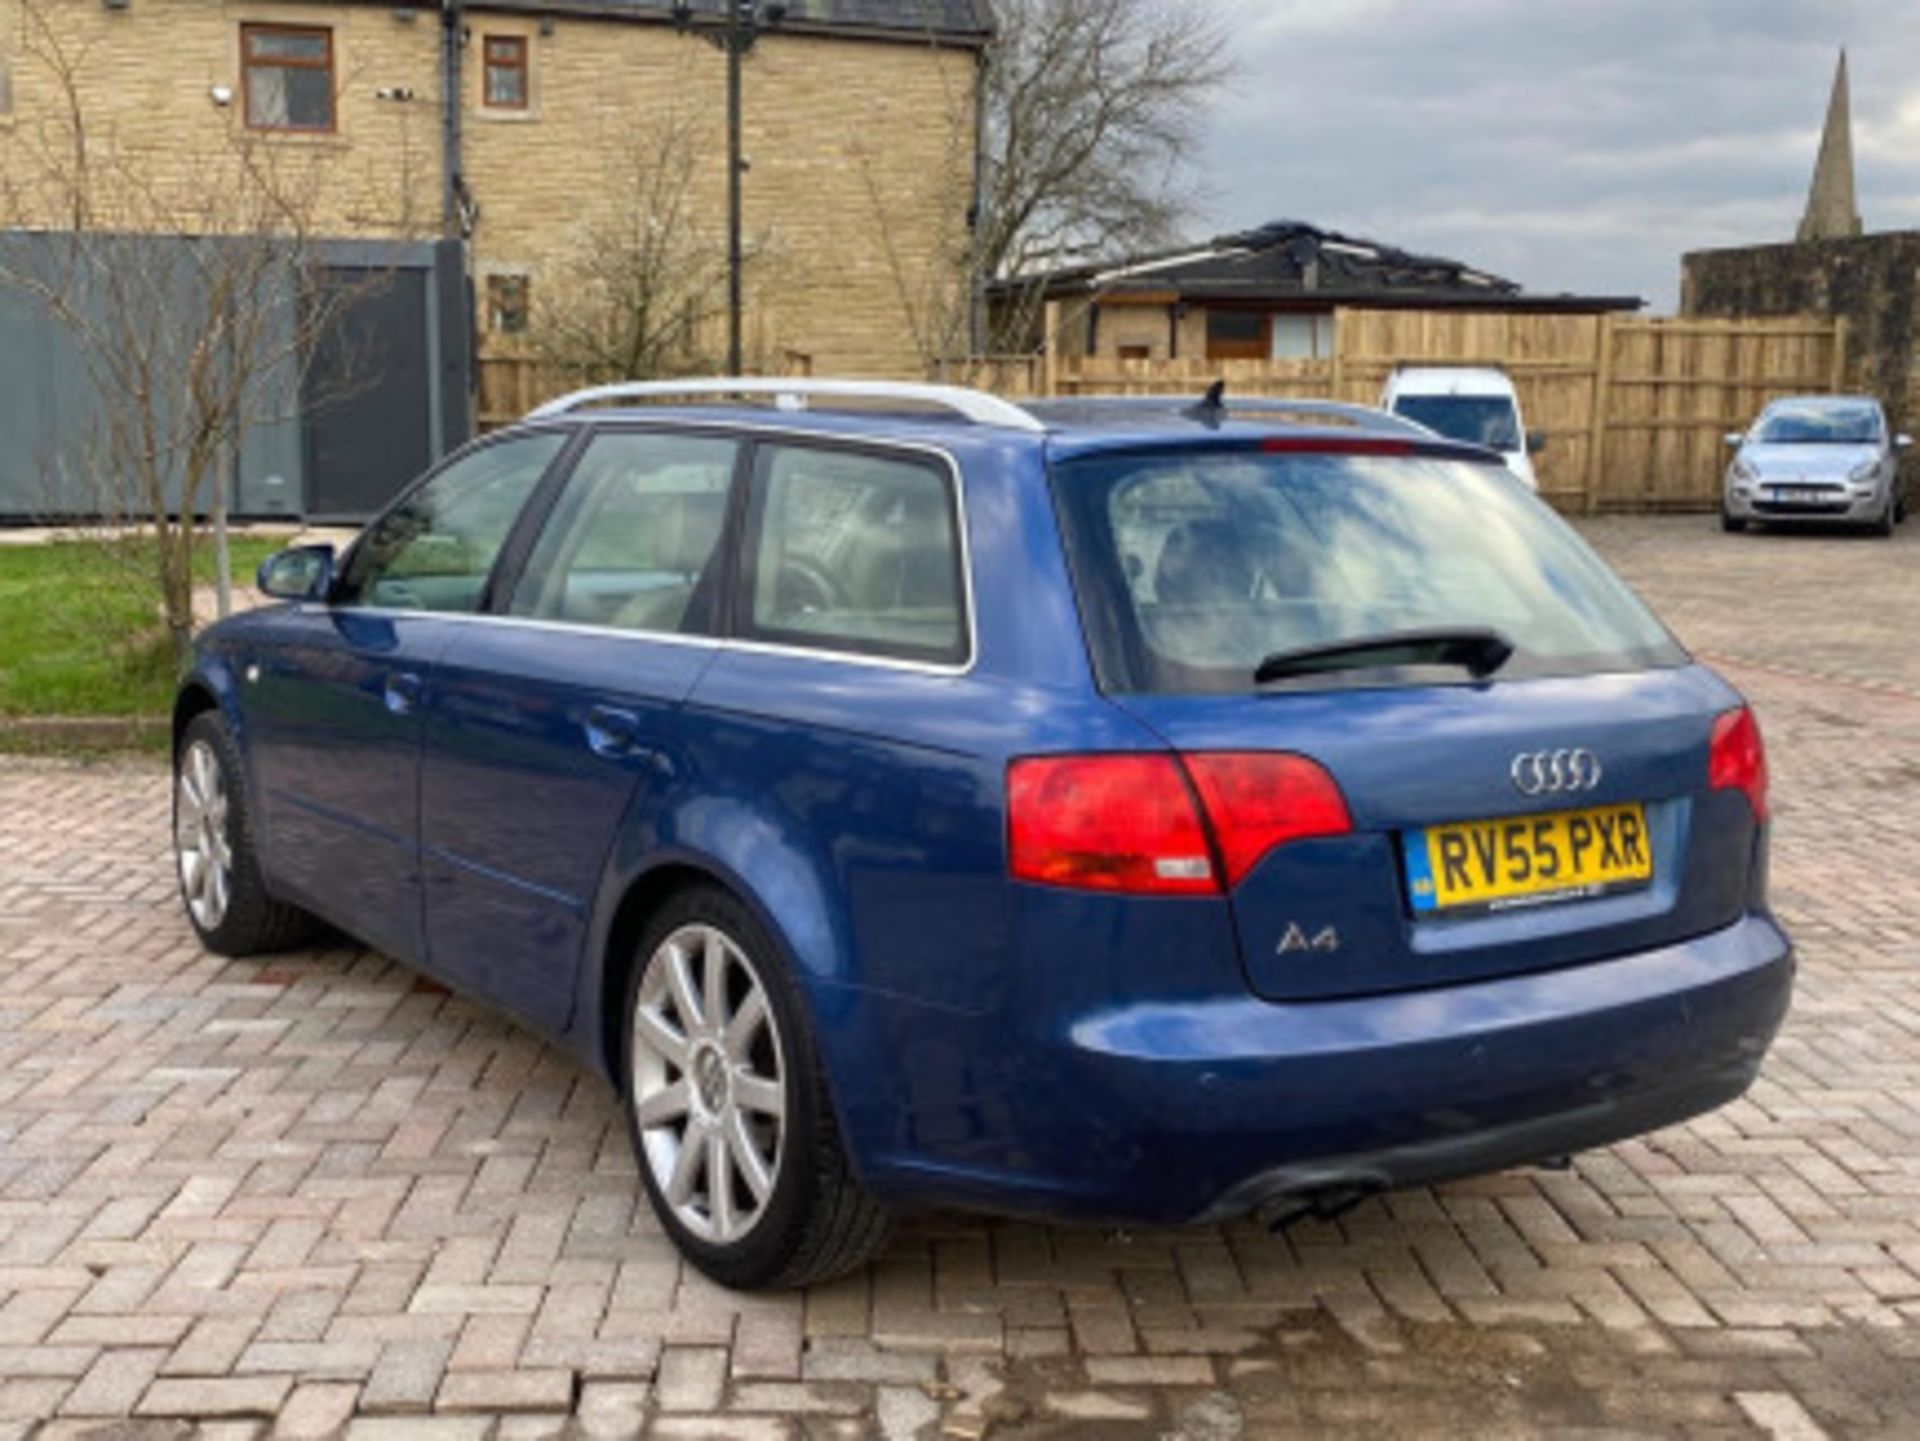 AUDI A4 AVANT 1.9 TDI SE 5DR ESTATE - RARE AND RELIABLE LUXURY WAGON >>--NO VAT ON HAMMER--<< - Image 36 of 97